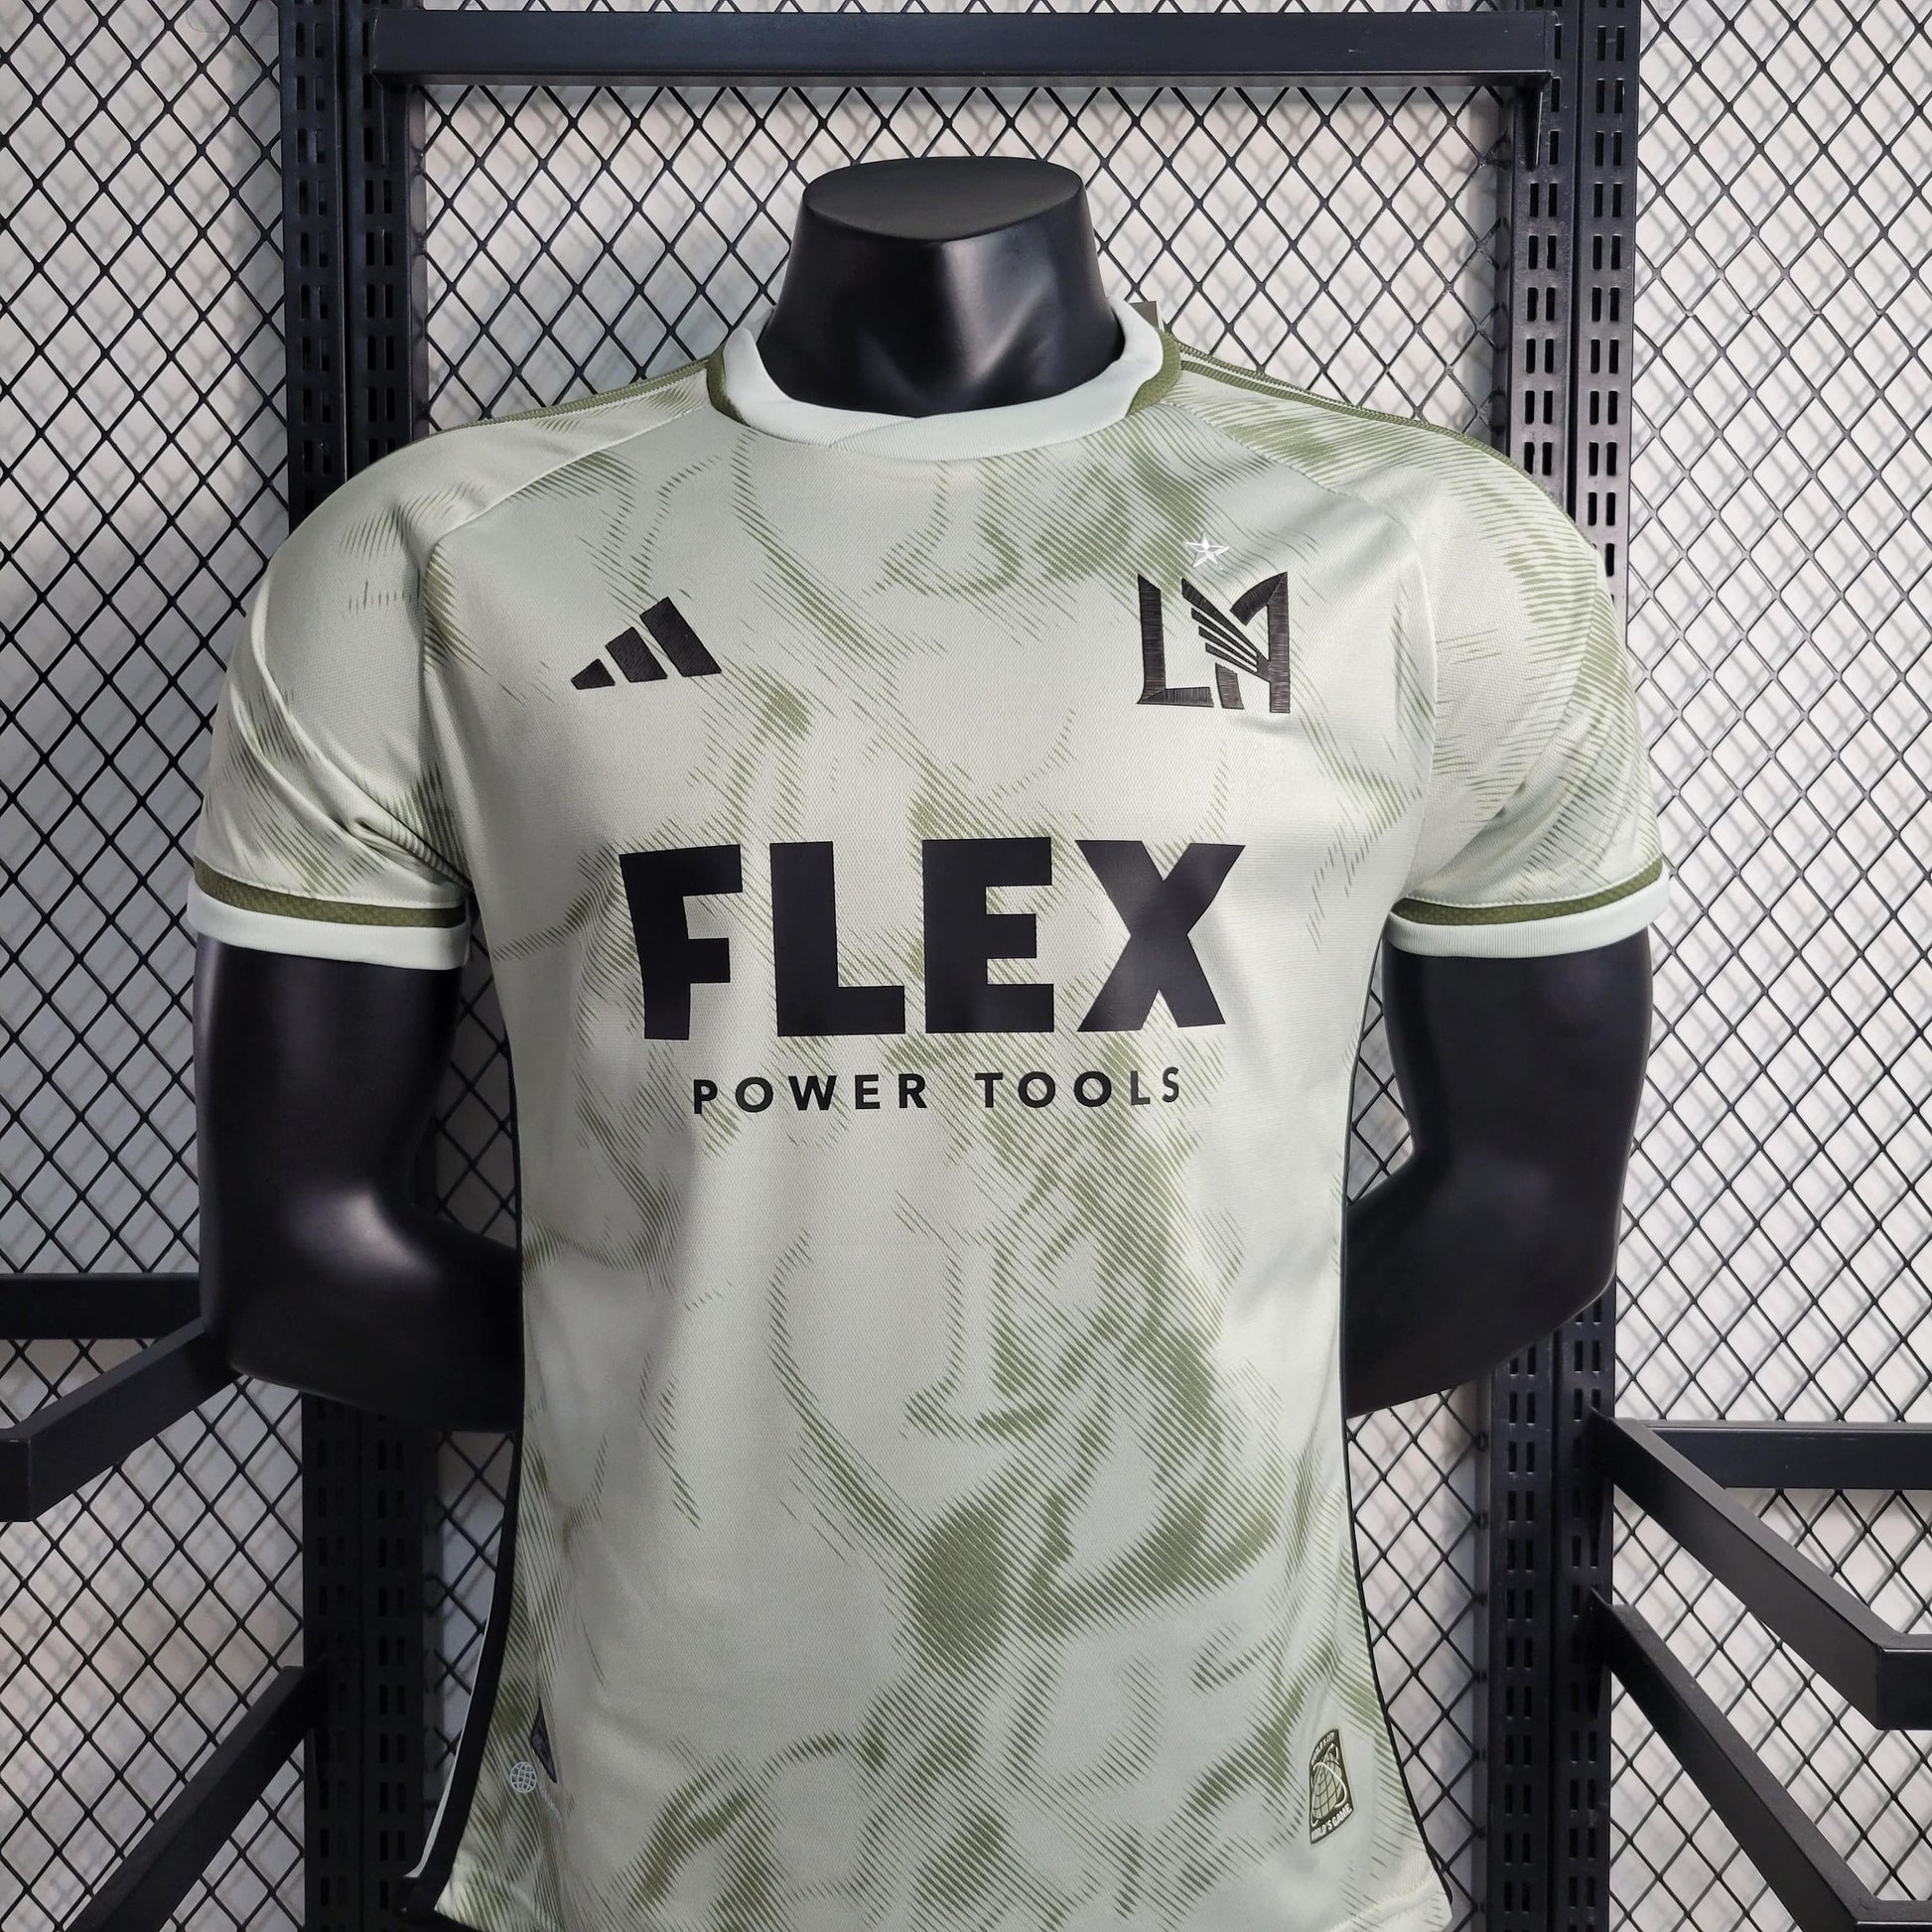 Adidas Men's LAFC Authentic Away Jersey 2023/24 M